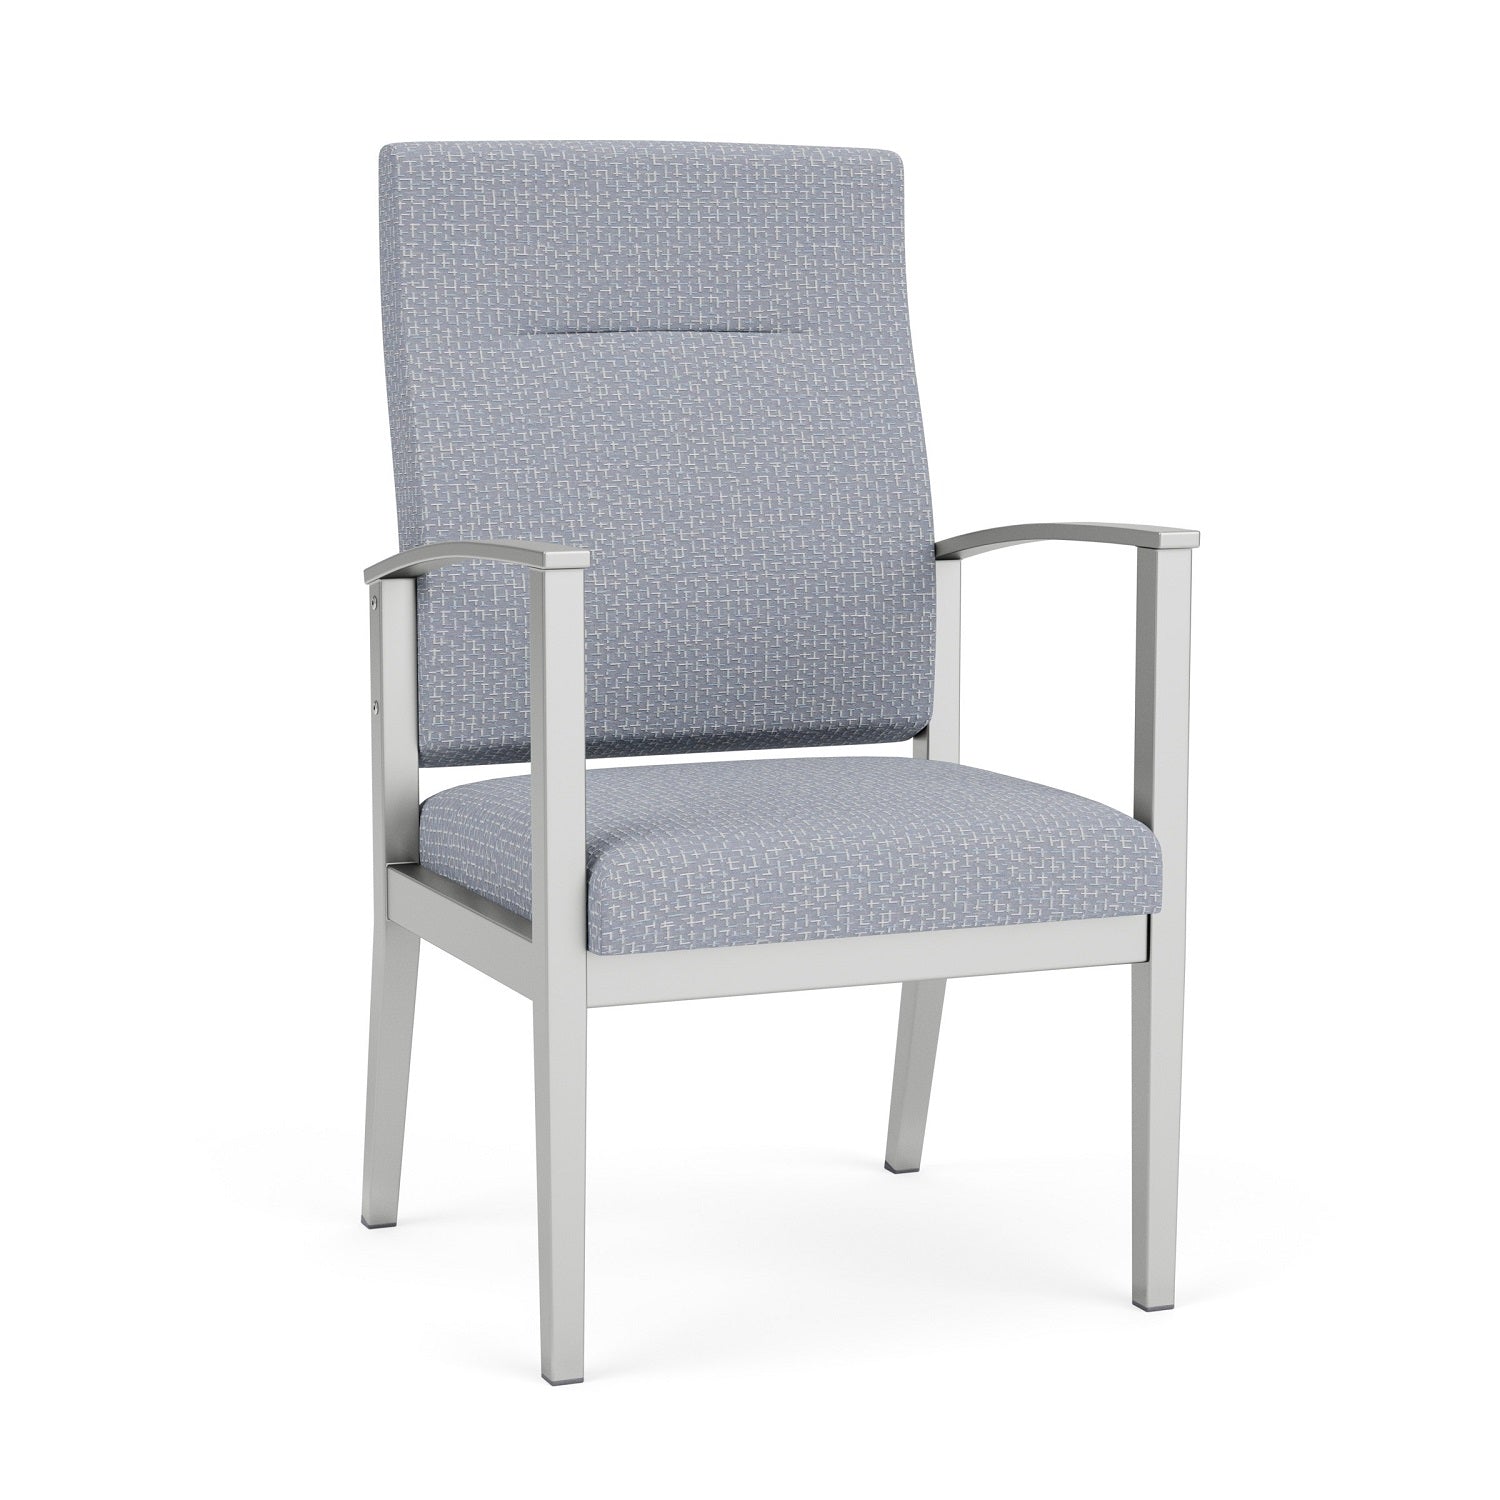 Amherst Steel Collection Reception Seating, Patient Chair, High Back, Designer Fabric Upholstery, FREE SHIPPING